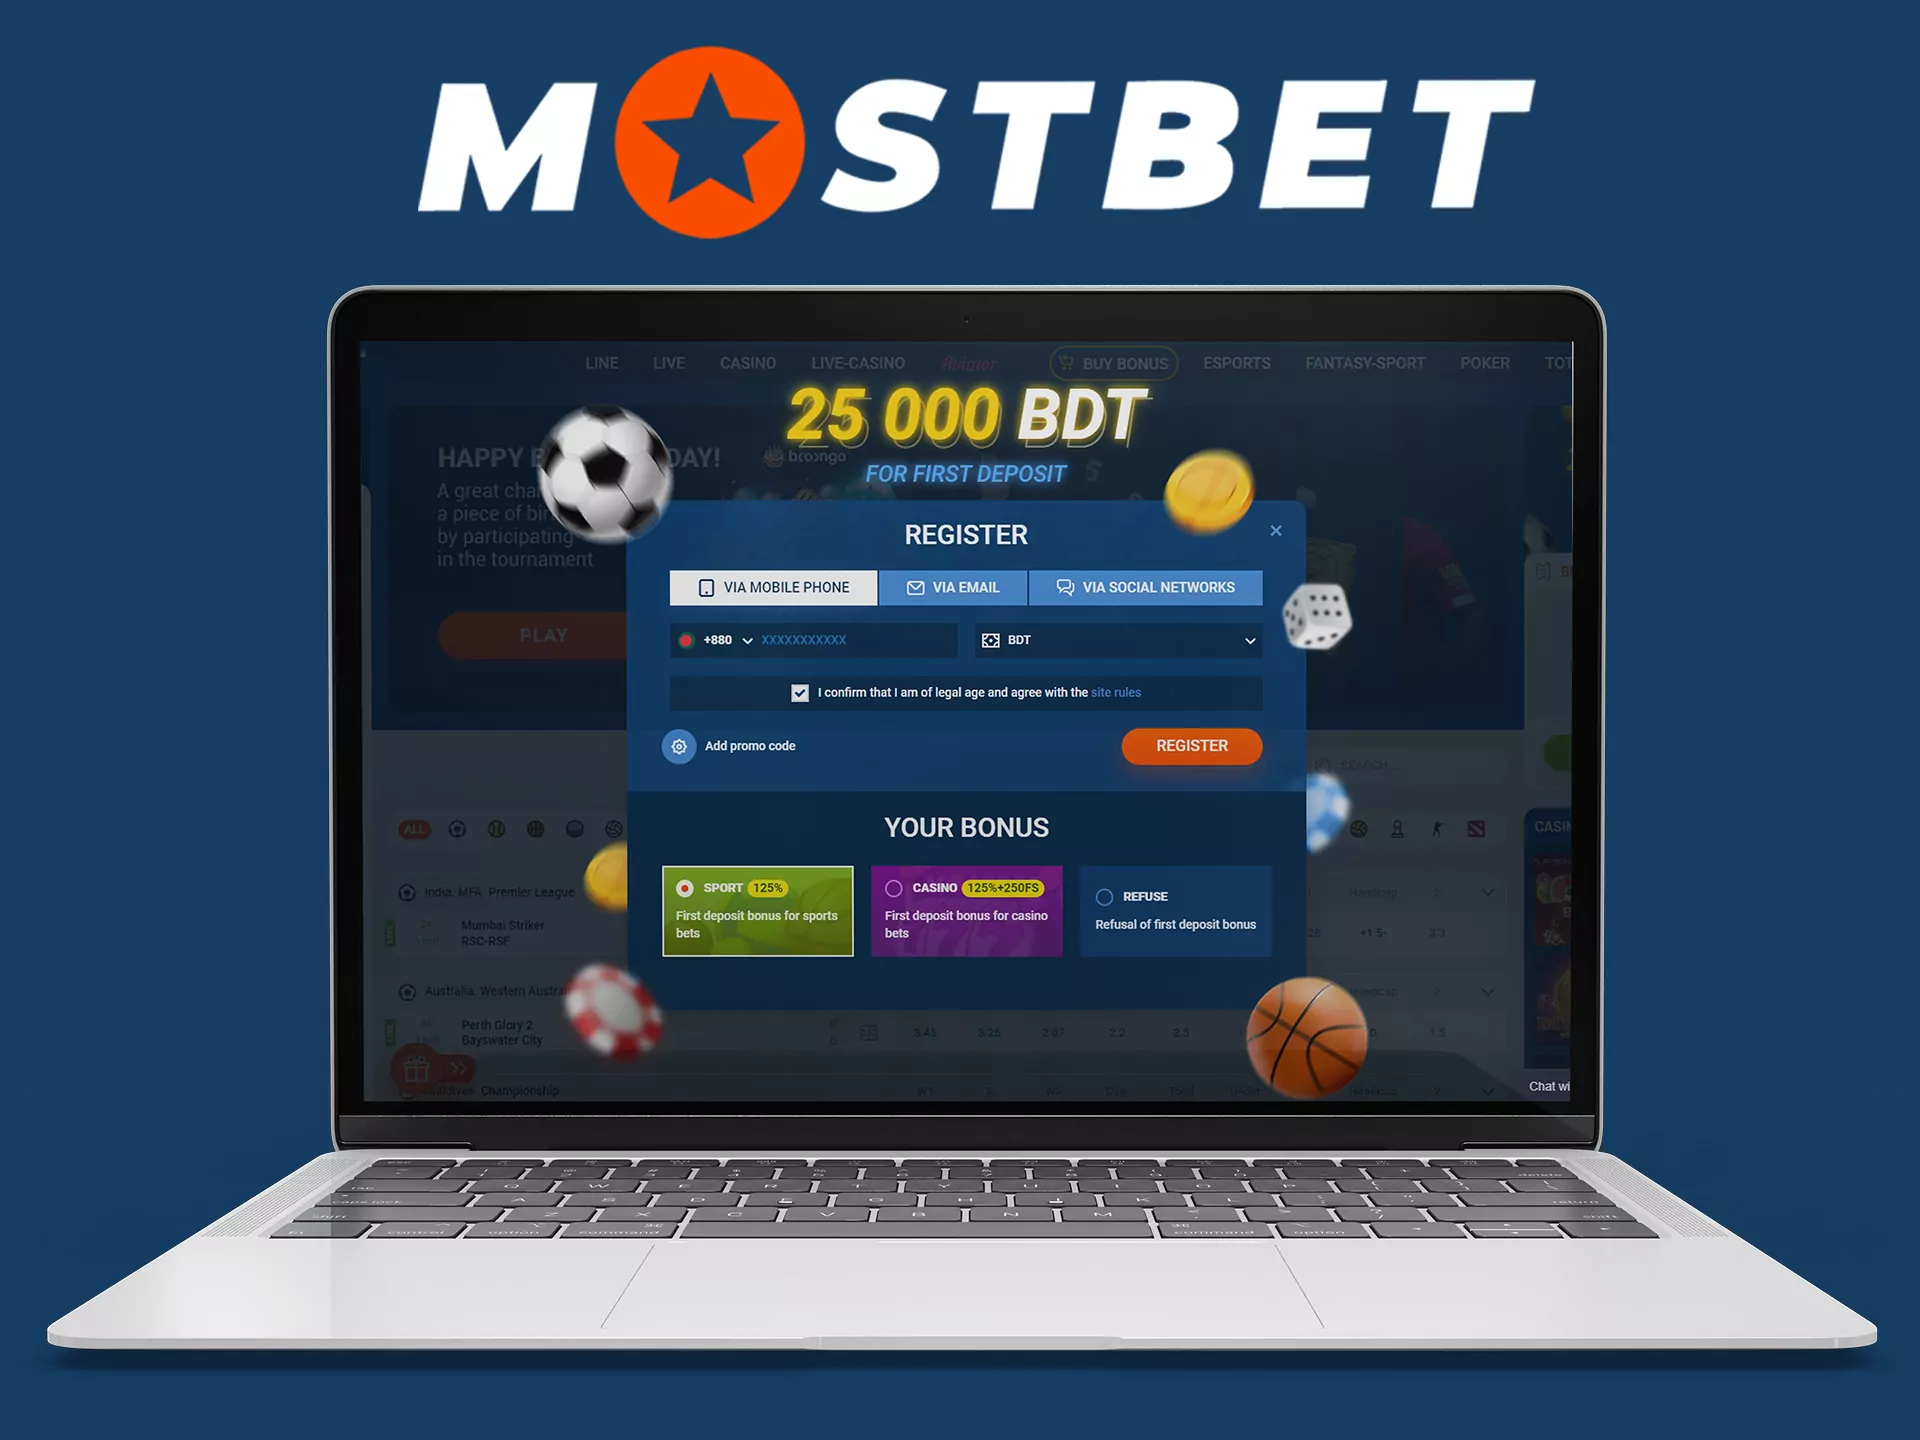 Go through Mostbet registration process and start online betting straightaway.